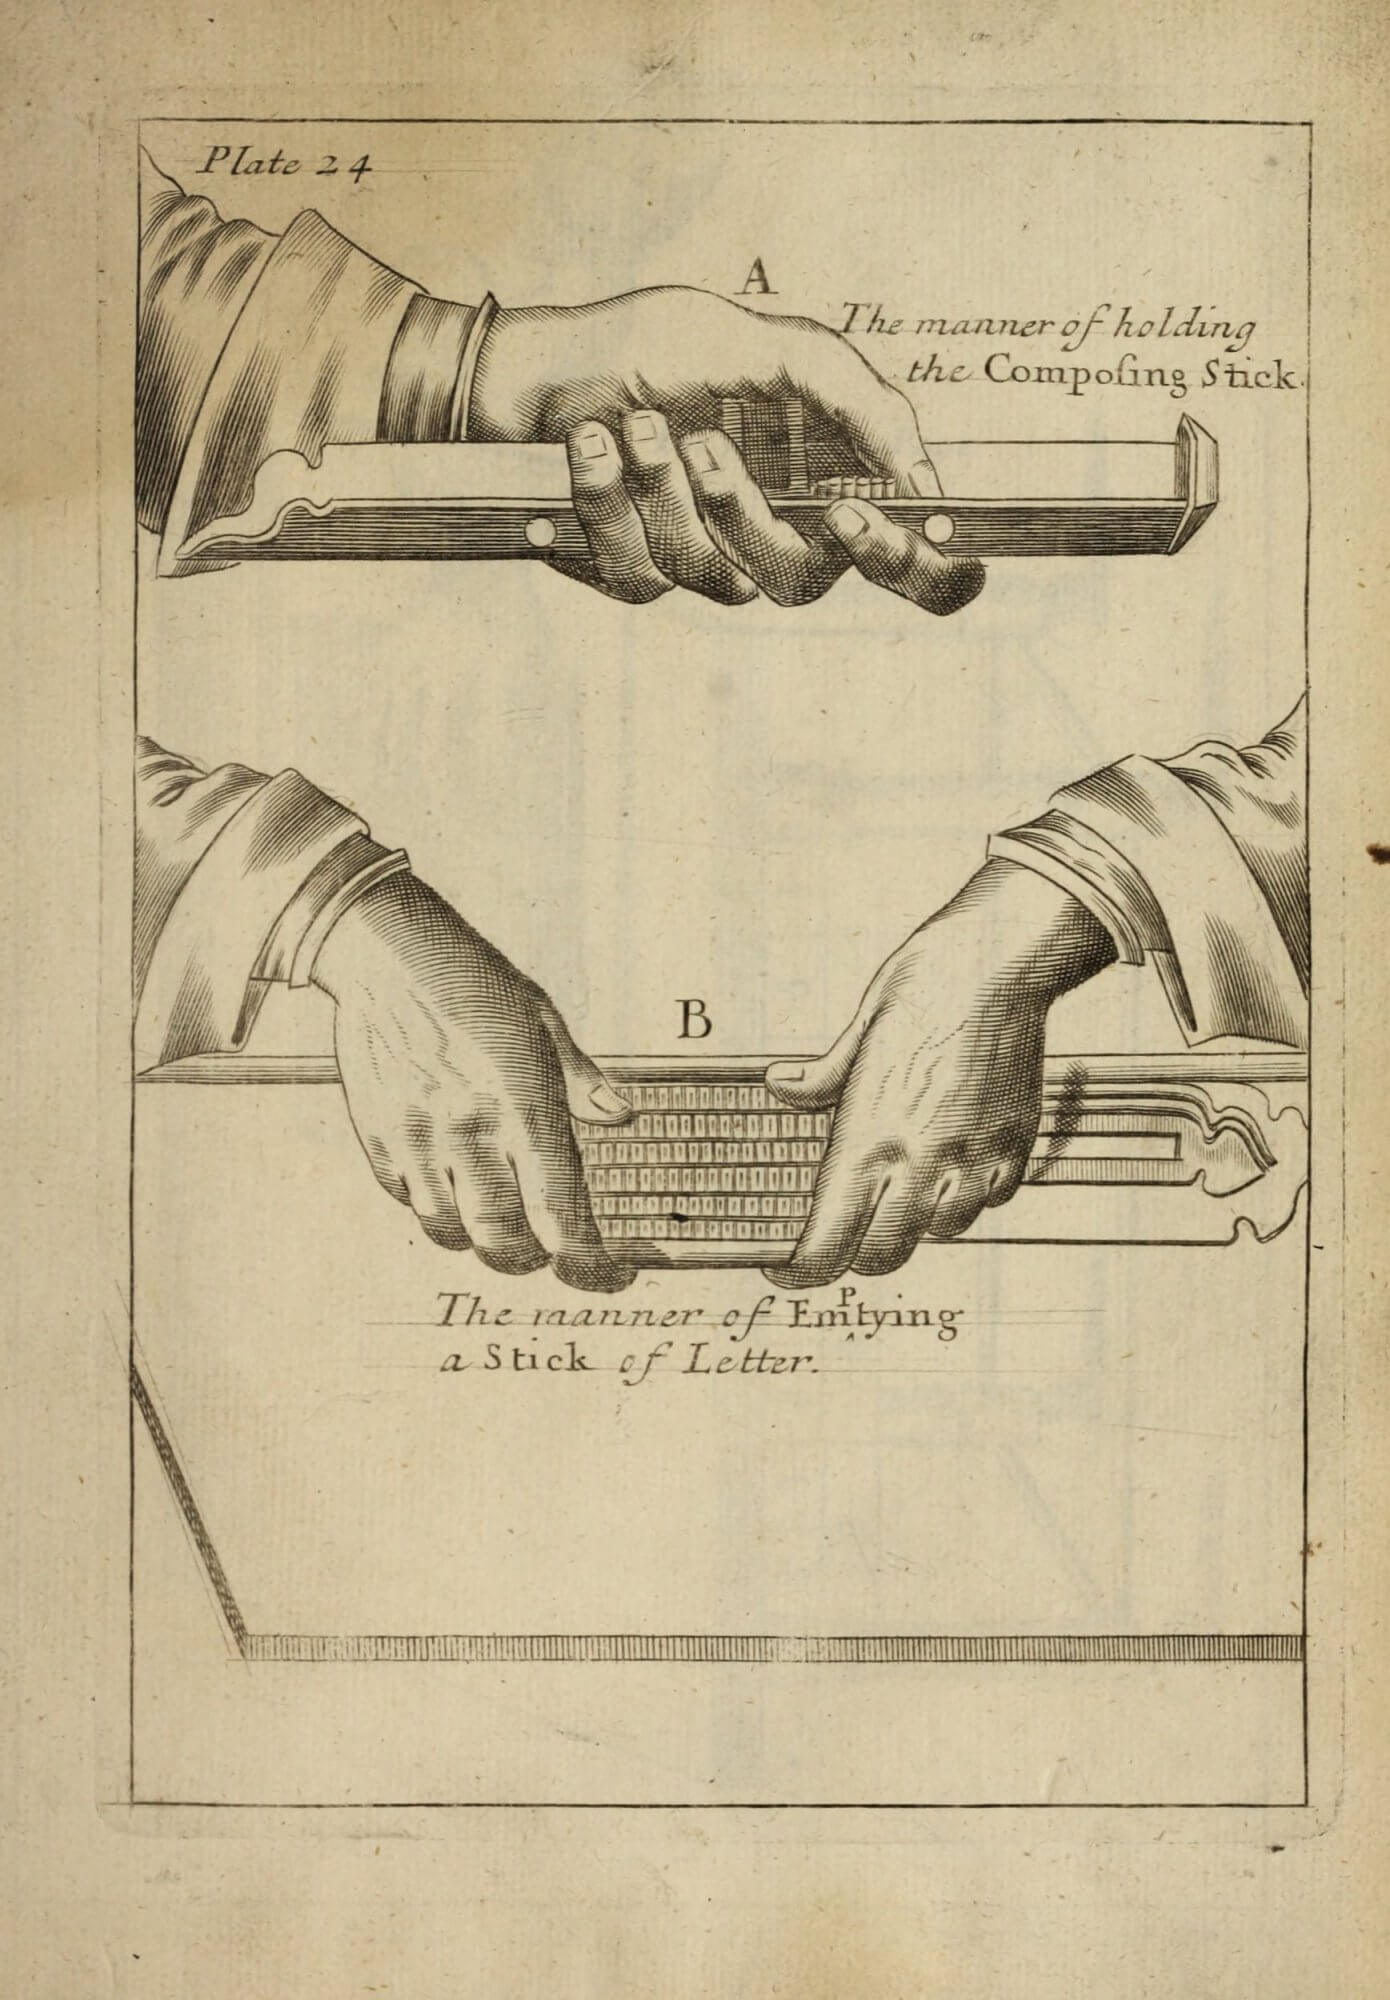 This entire page is made by engraving lines into a copper plate. When the engraver noticed that a letter had accidentally been dropped from "Emptying" in the caption, he used a caret to insert the "p" in its proper place.